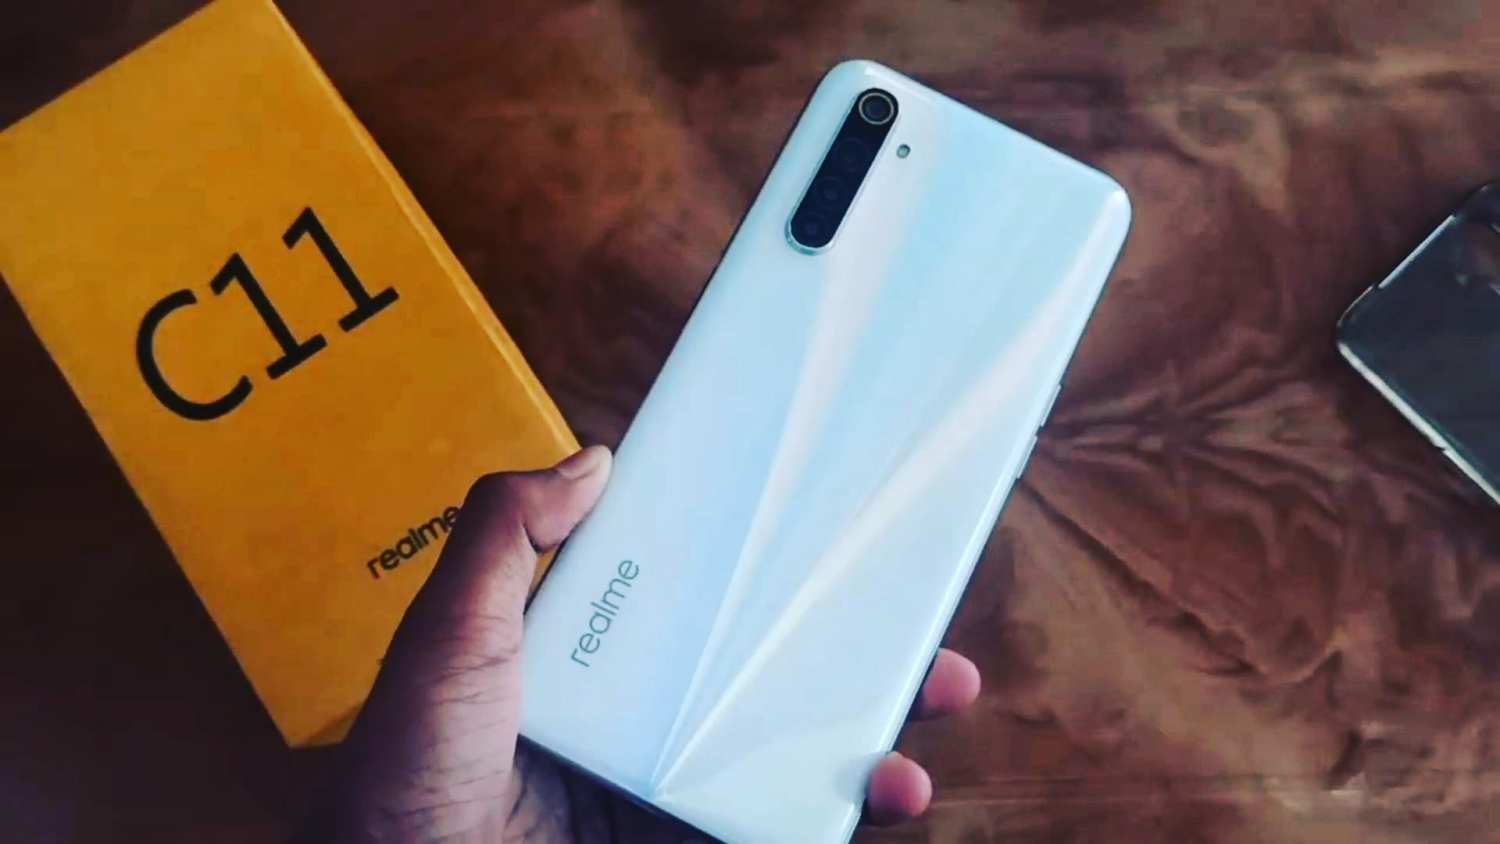 Realme C11 launches in new market outside of Europe